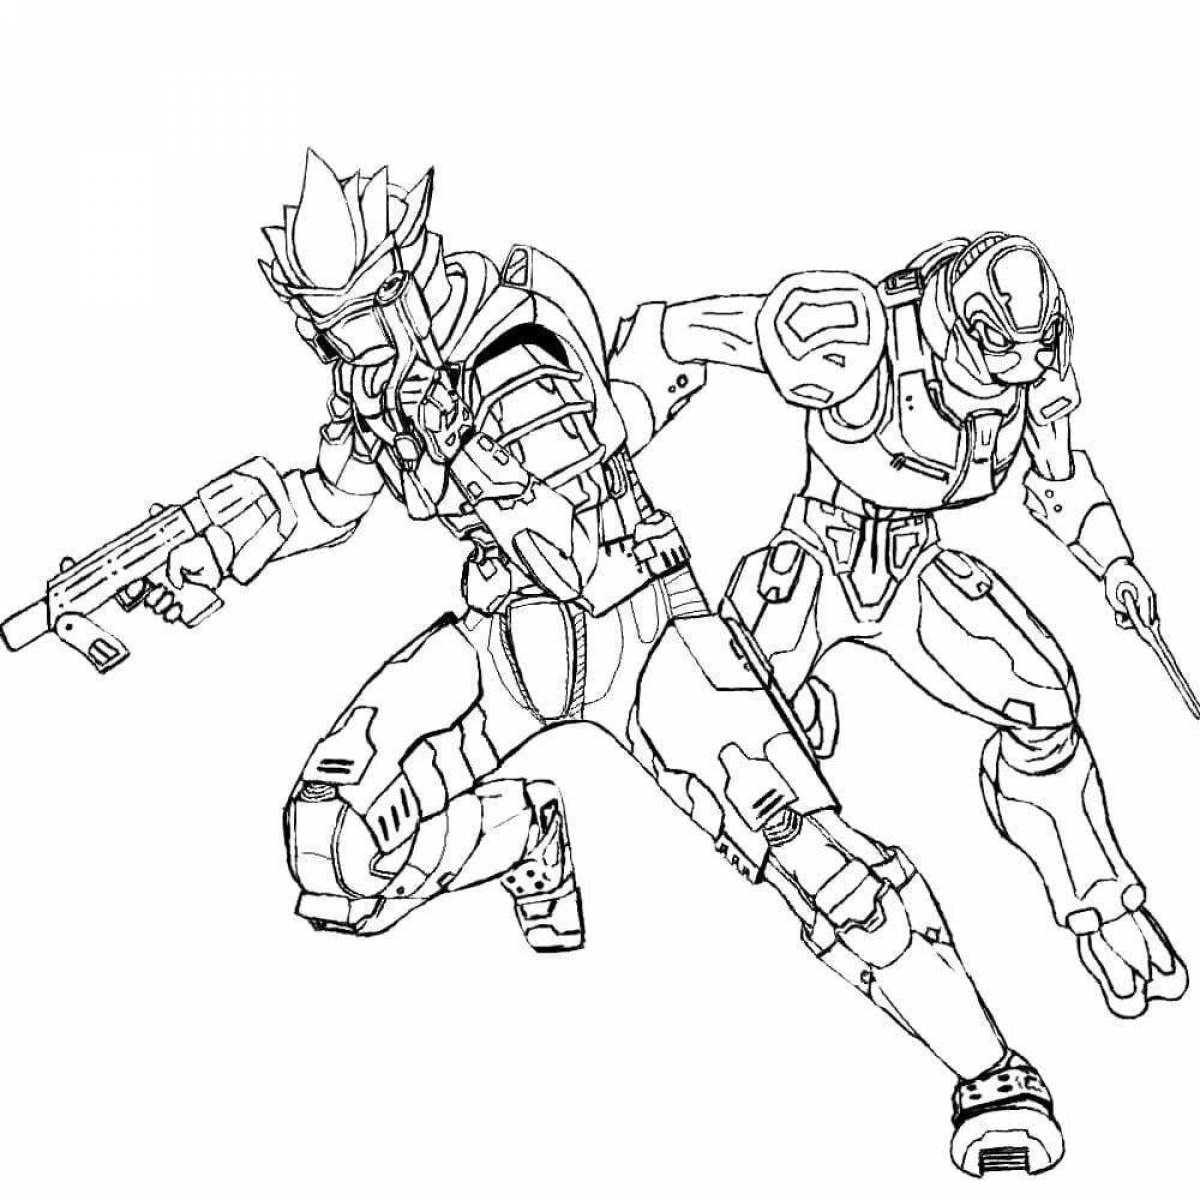 Adrenaline shooter coloring pages for boys